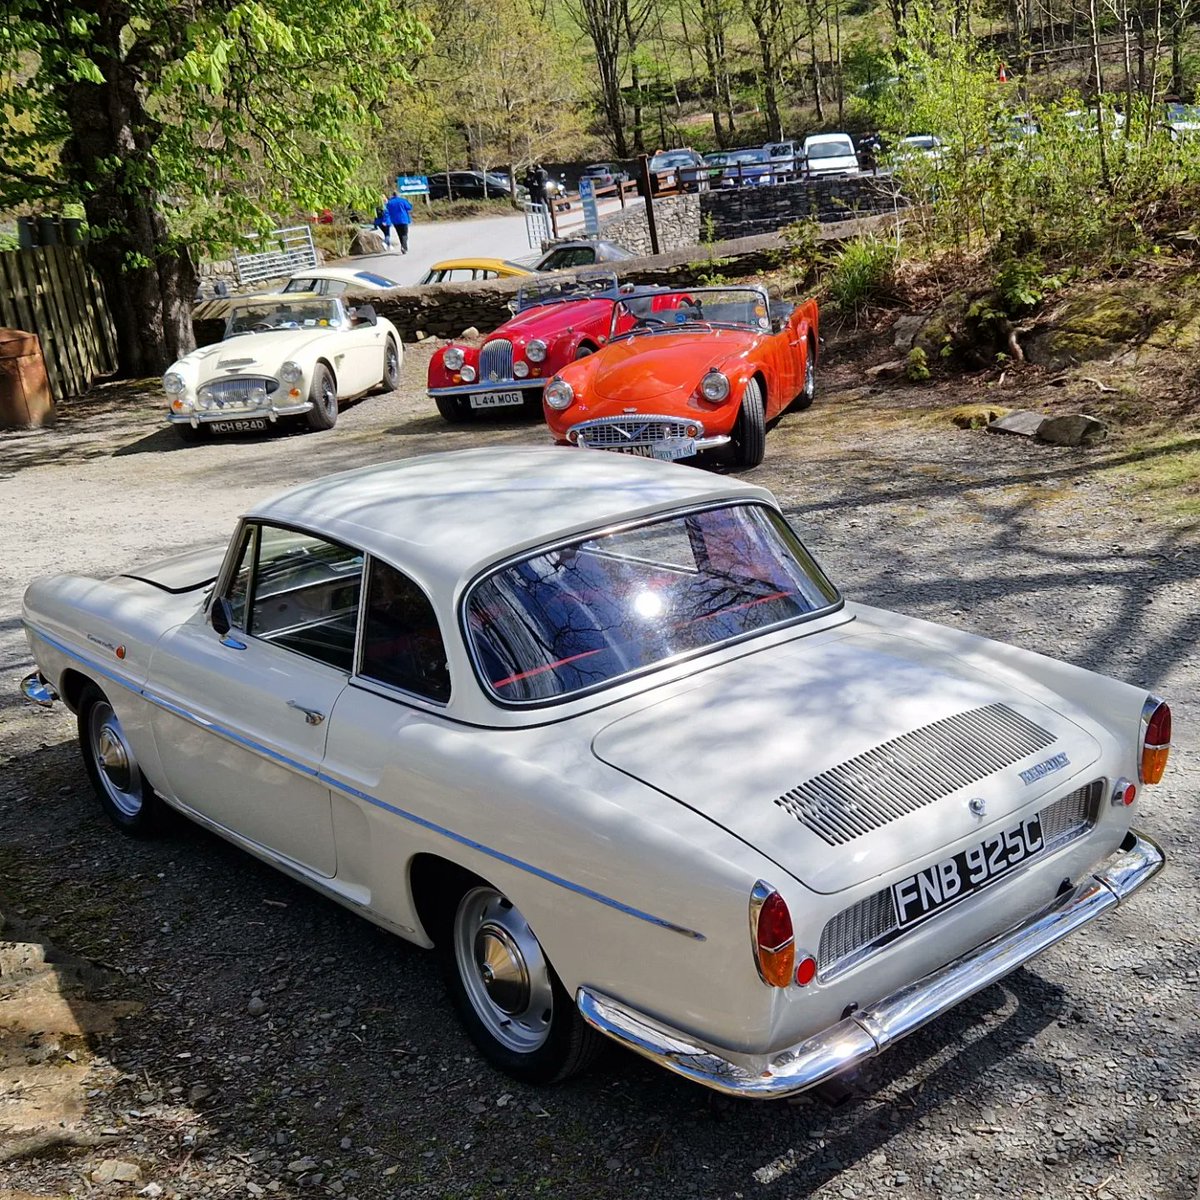 It's Drive-It Day today - what are you getting up to with your classic? Don't forget to email ccwdriveitday@gmail.com a pic of you with your car... #driveitday